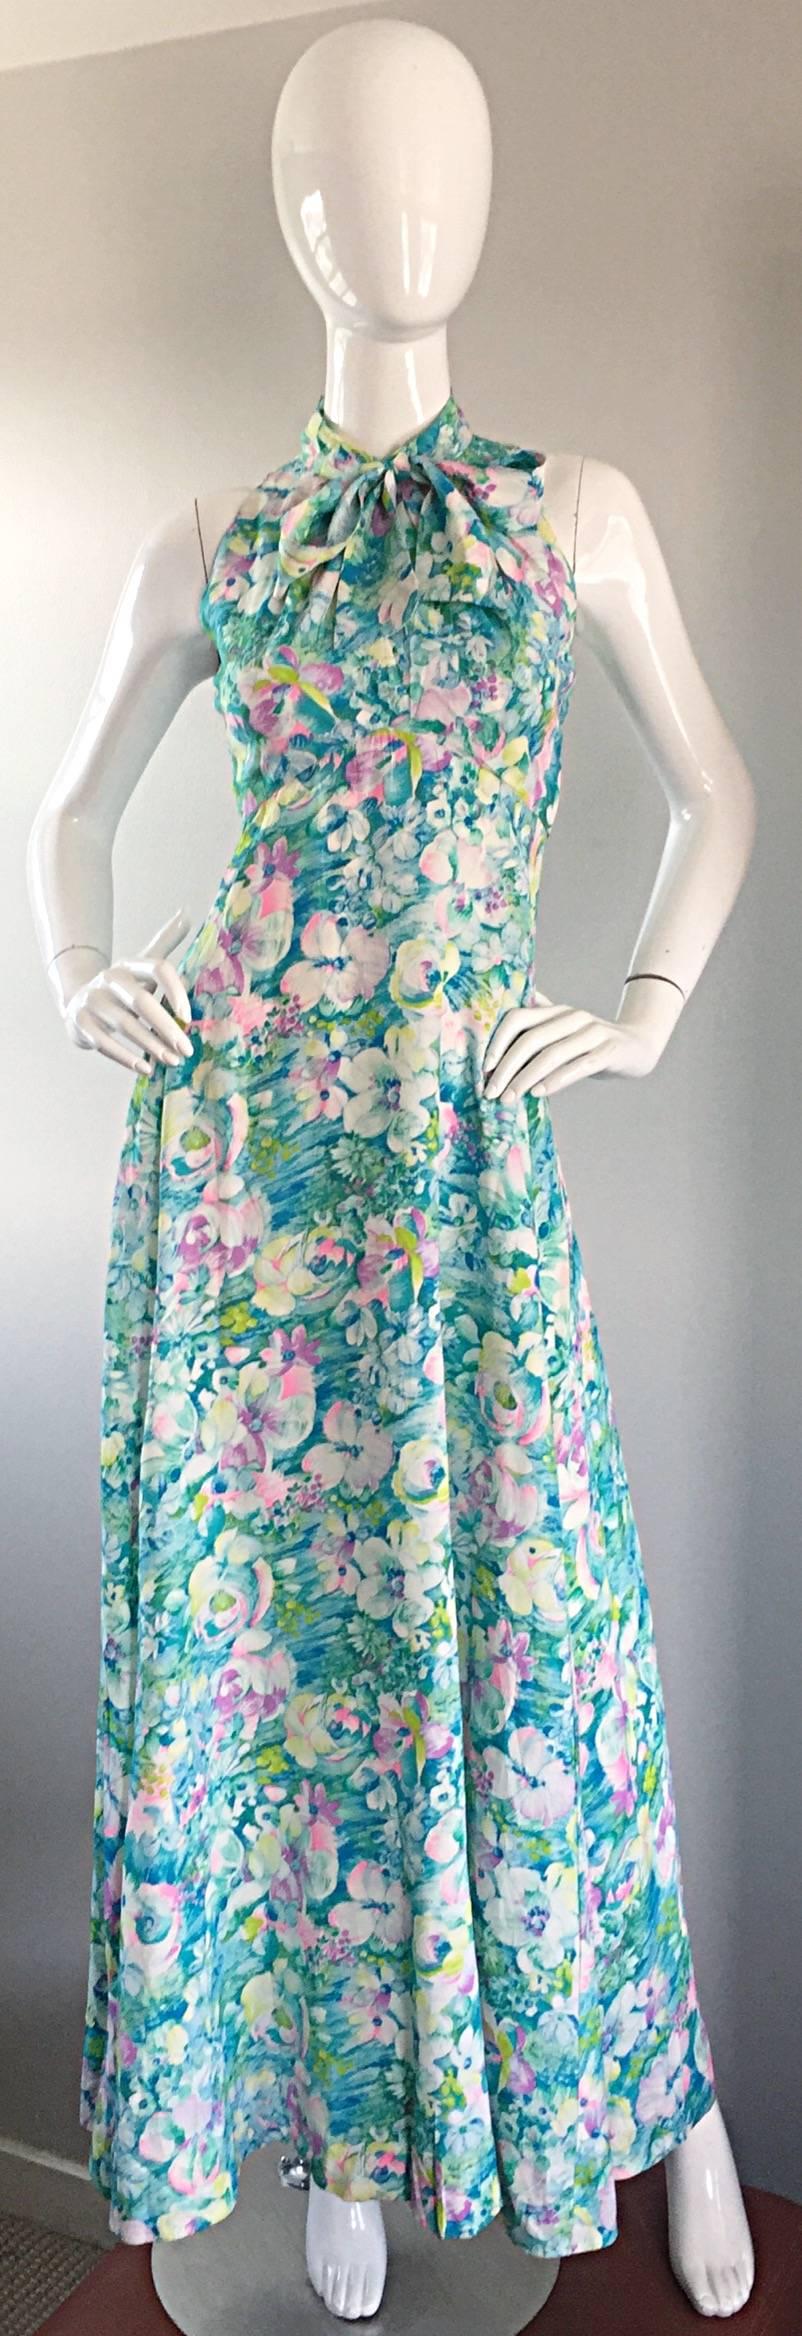 Beautiful early 70s, late 1960s / 60s watercolor printed maxi dress! Features a beautiful watercolor floral print in blues, teals, purples, pinks and greens! Attached pussycat bow at neck can be worn tied in a bow or left loose. Wonderful trapeze